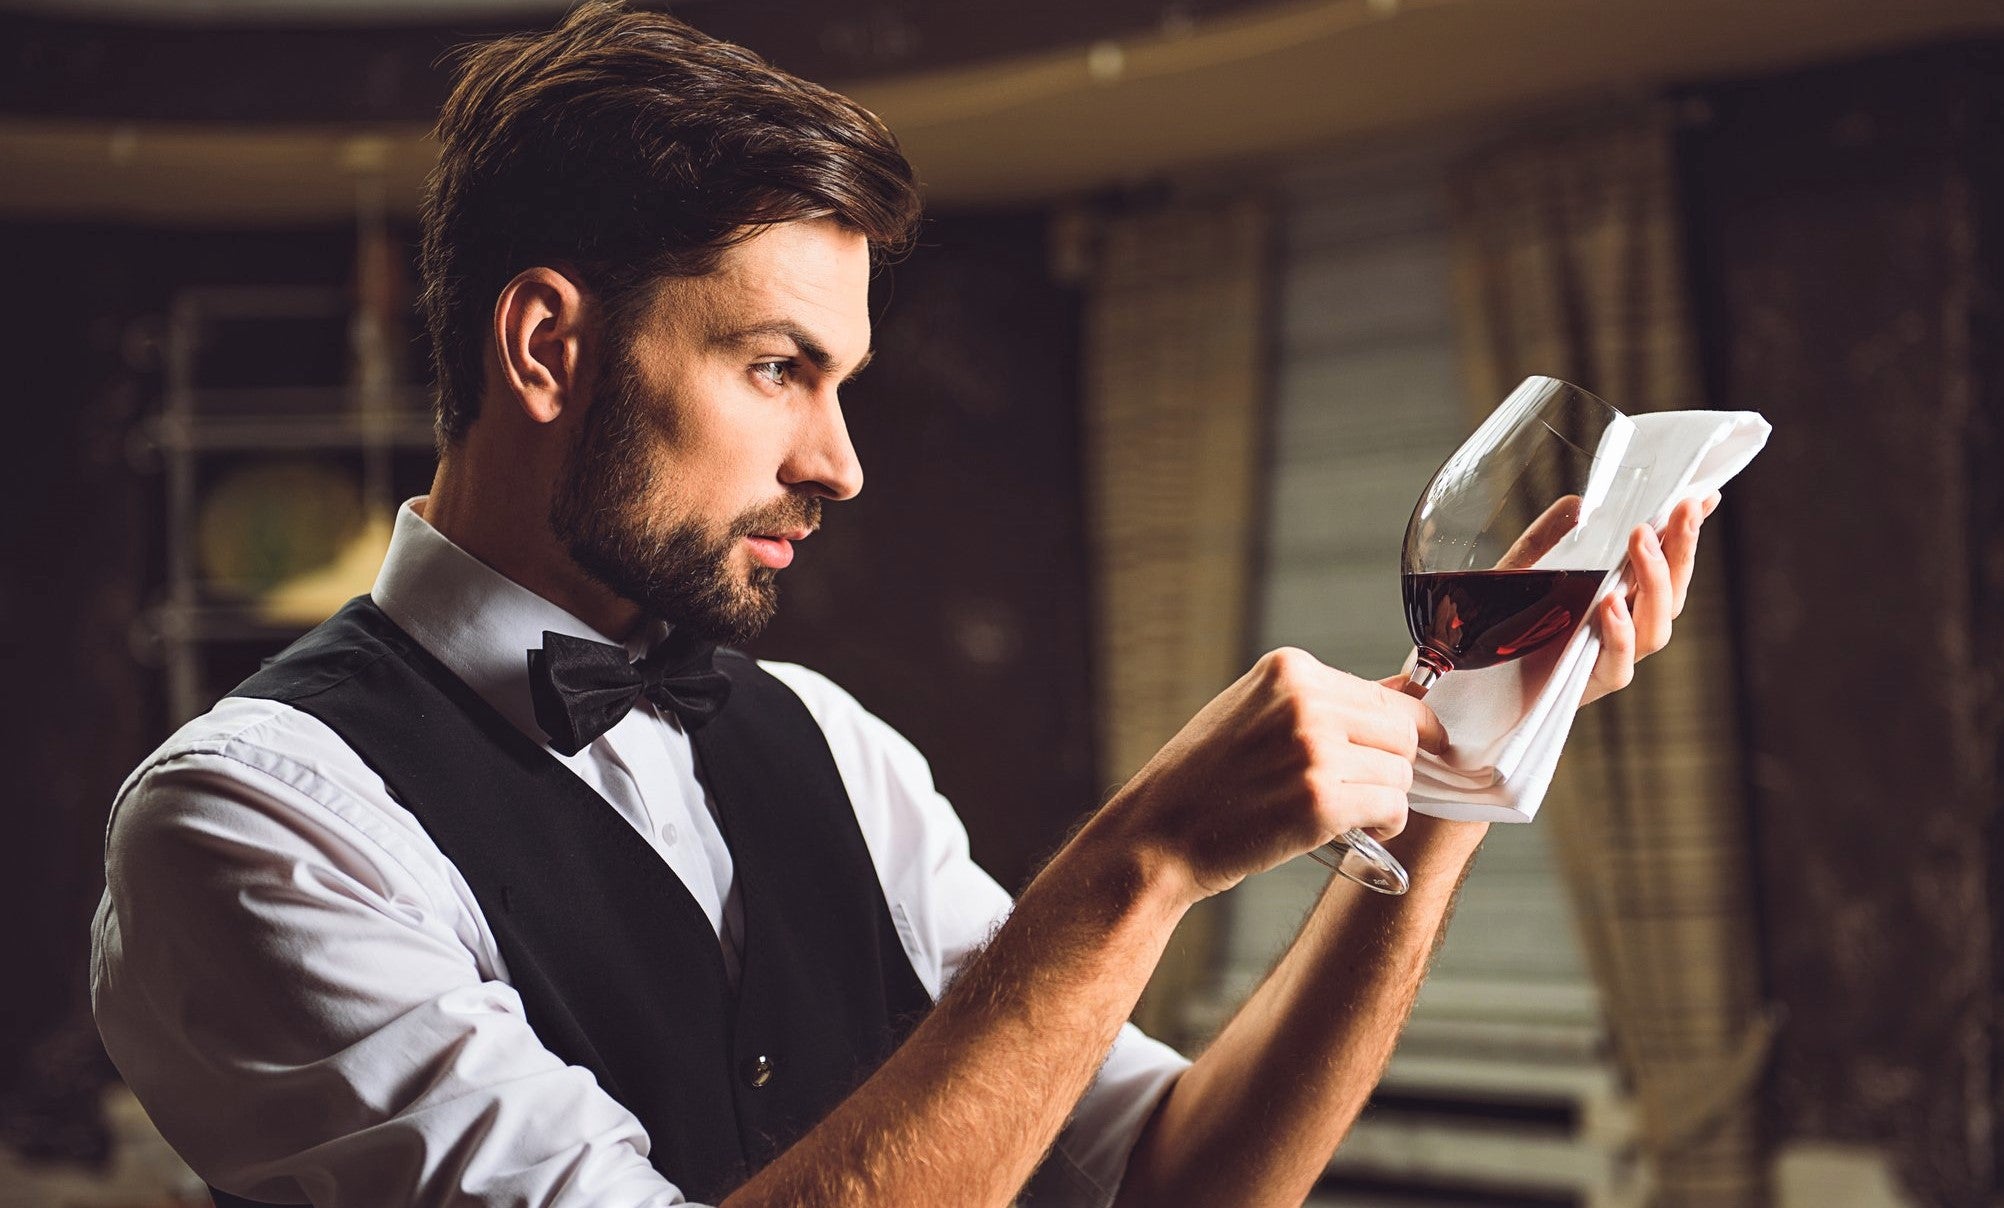 sommelier in white shirt and black waistcoat inspects glass of red wine